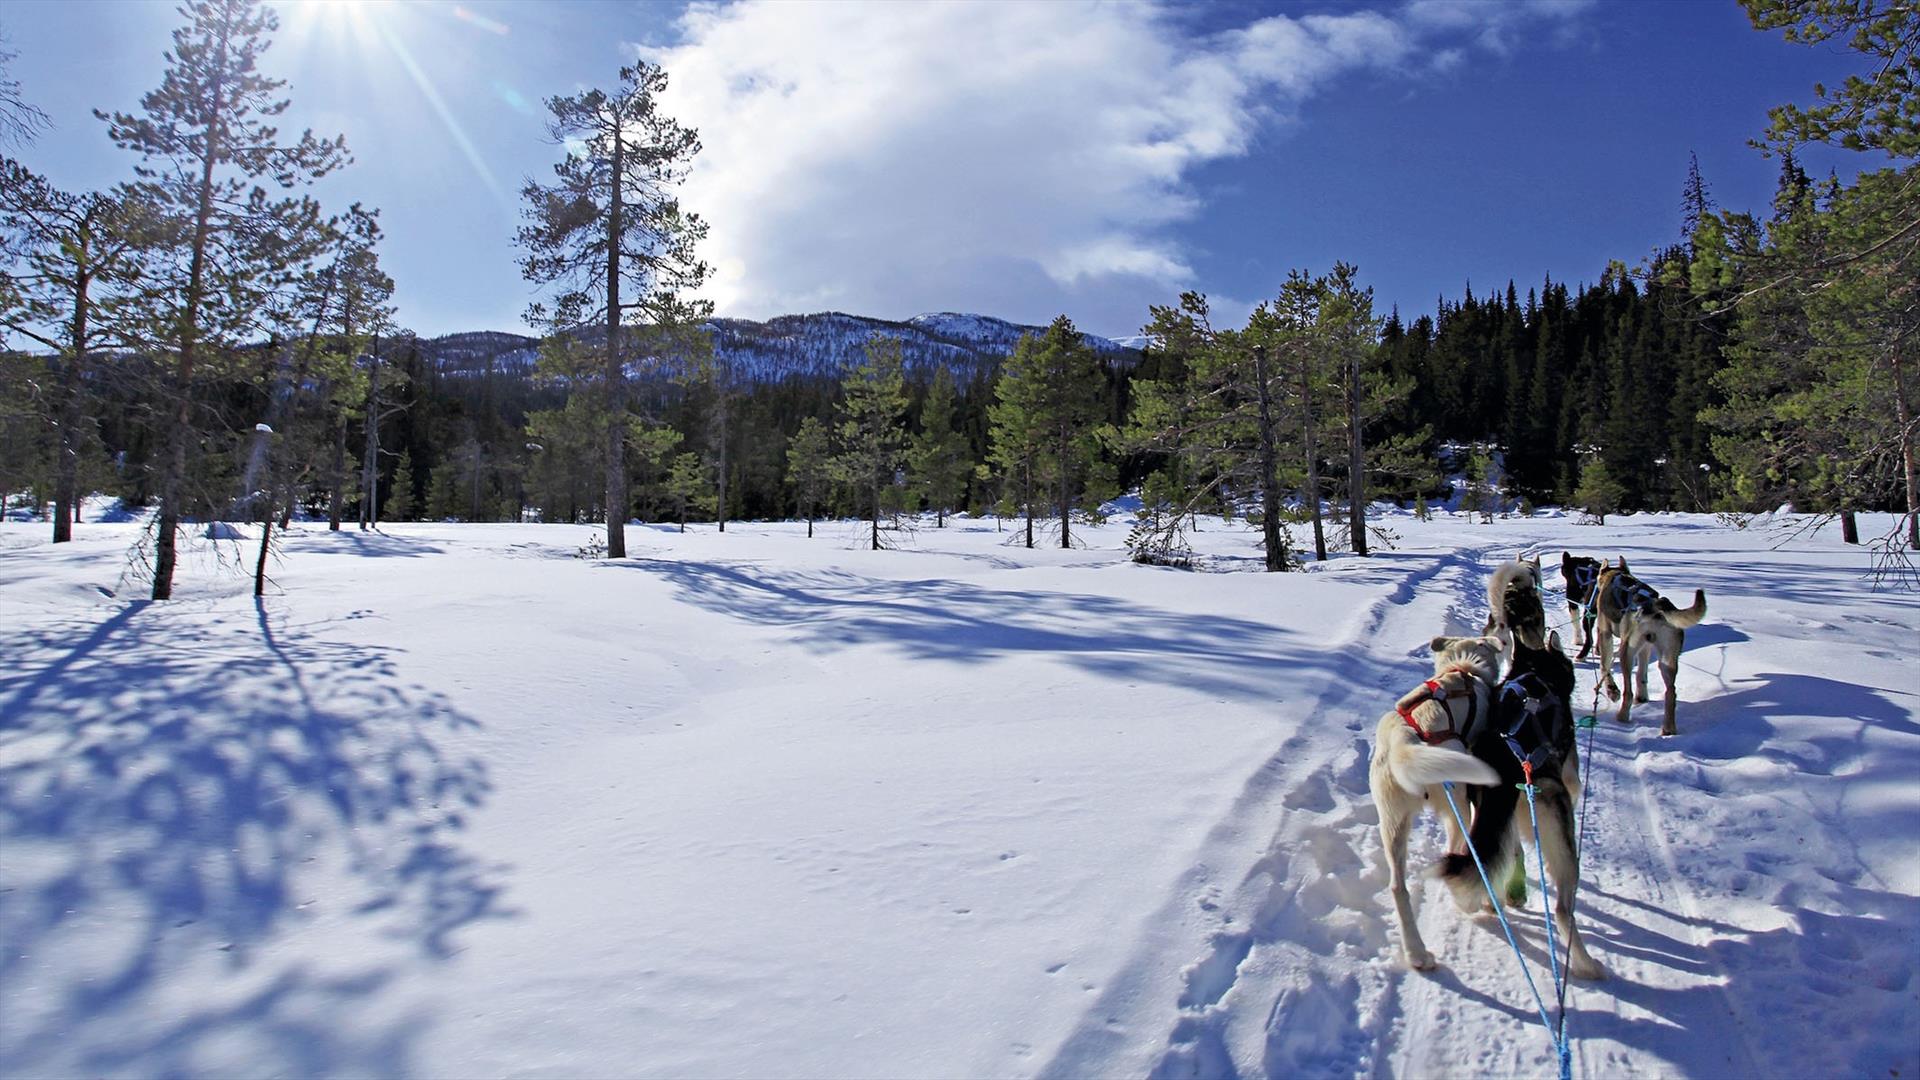 A dog-sledding team races on a track through open pine forest.